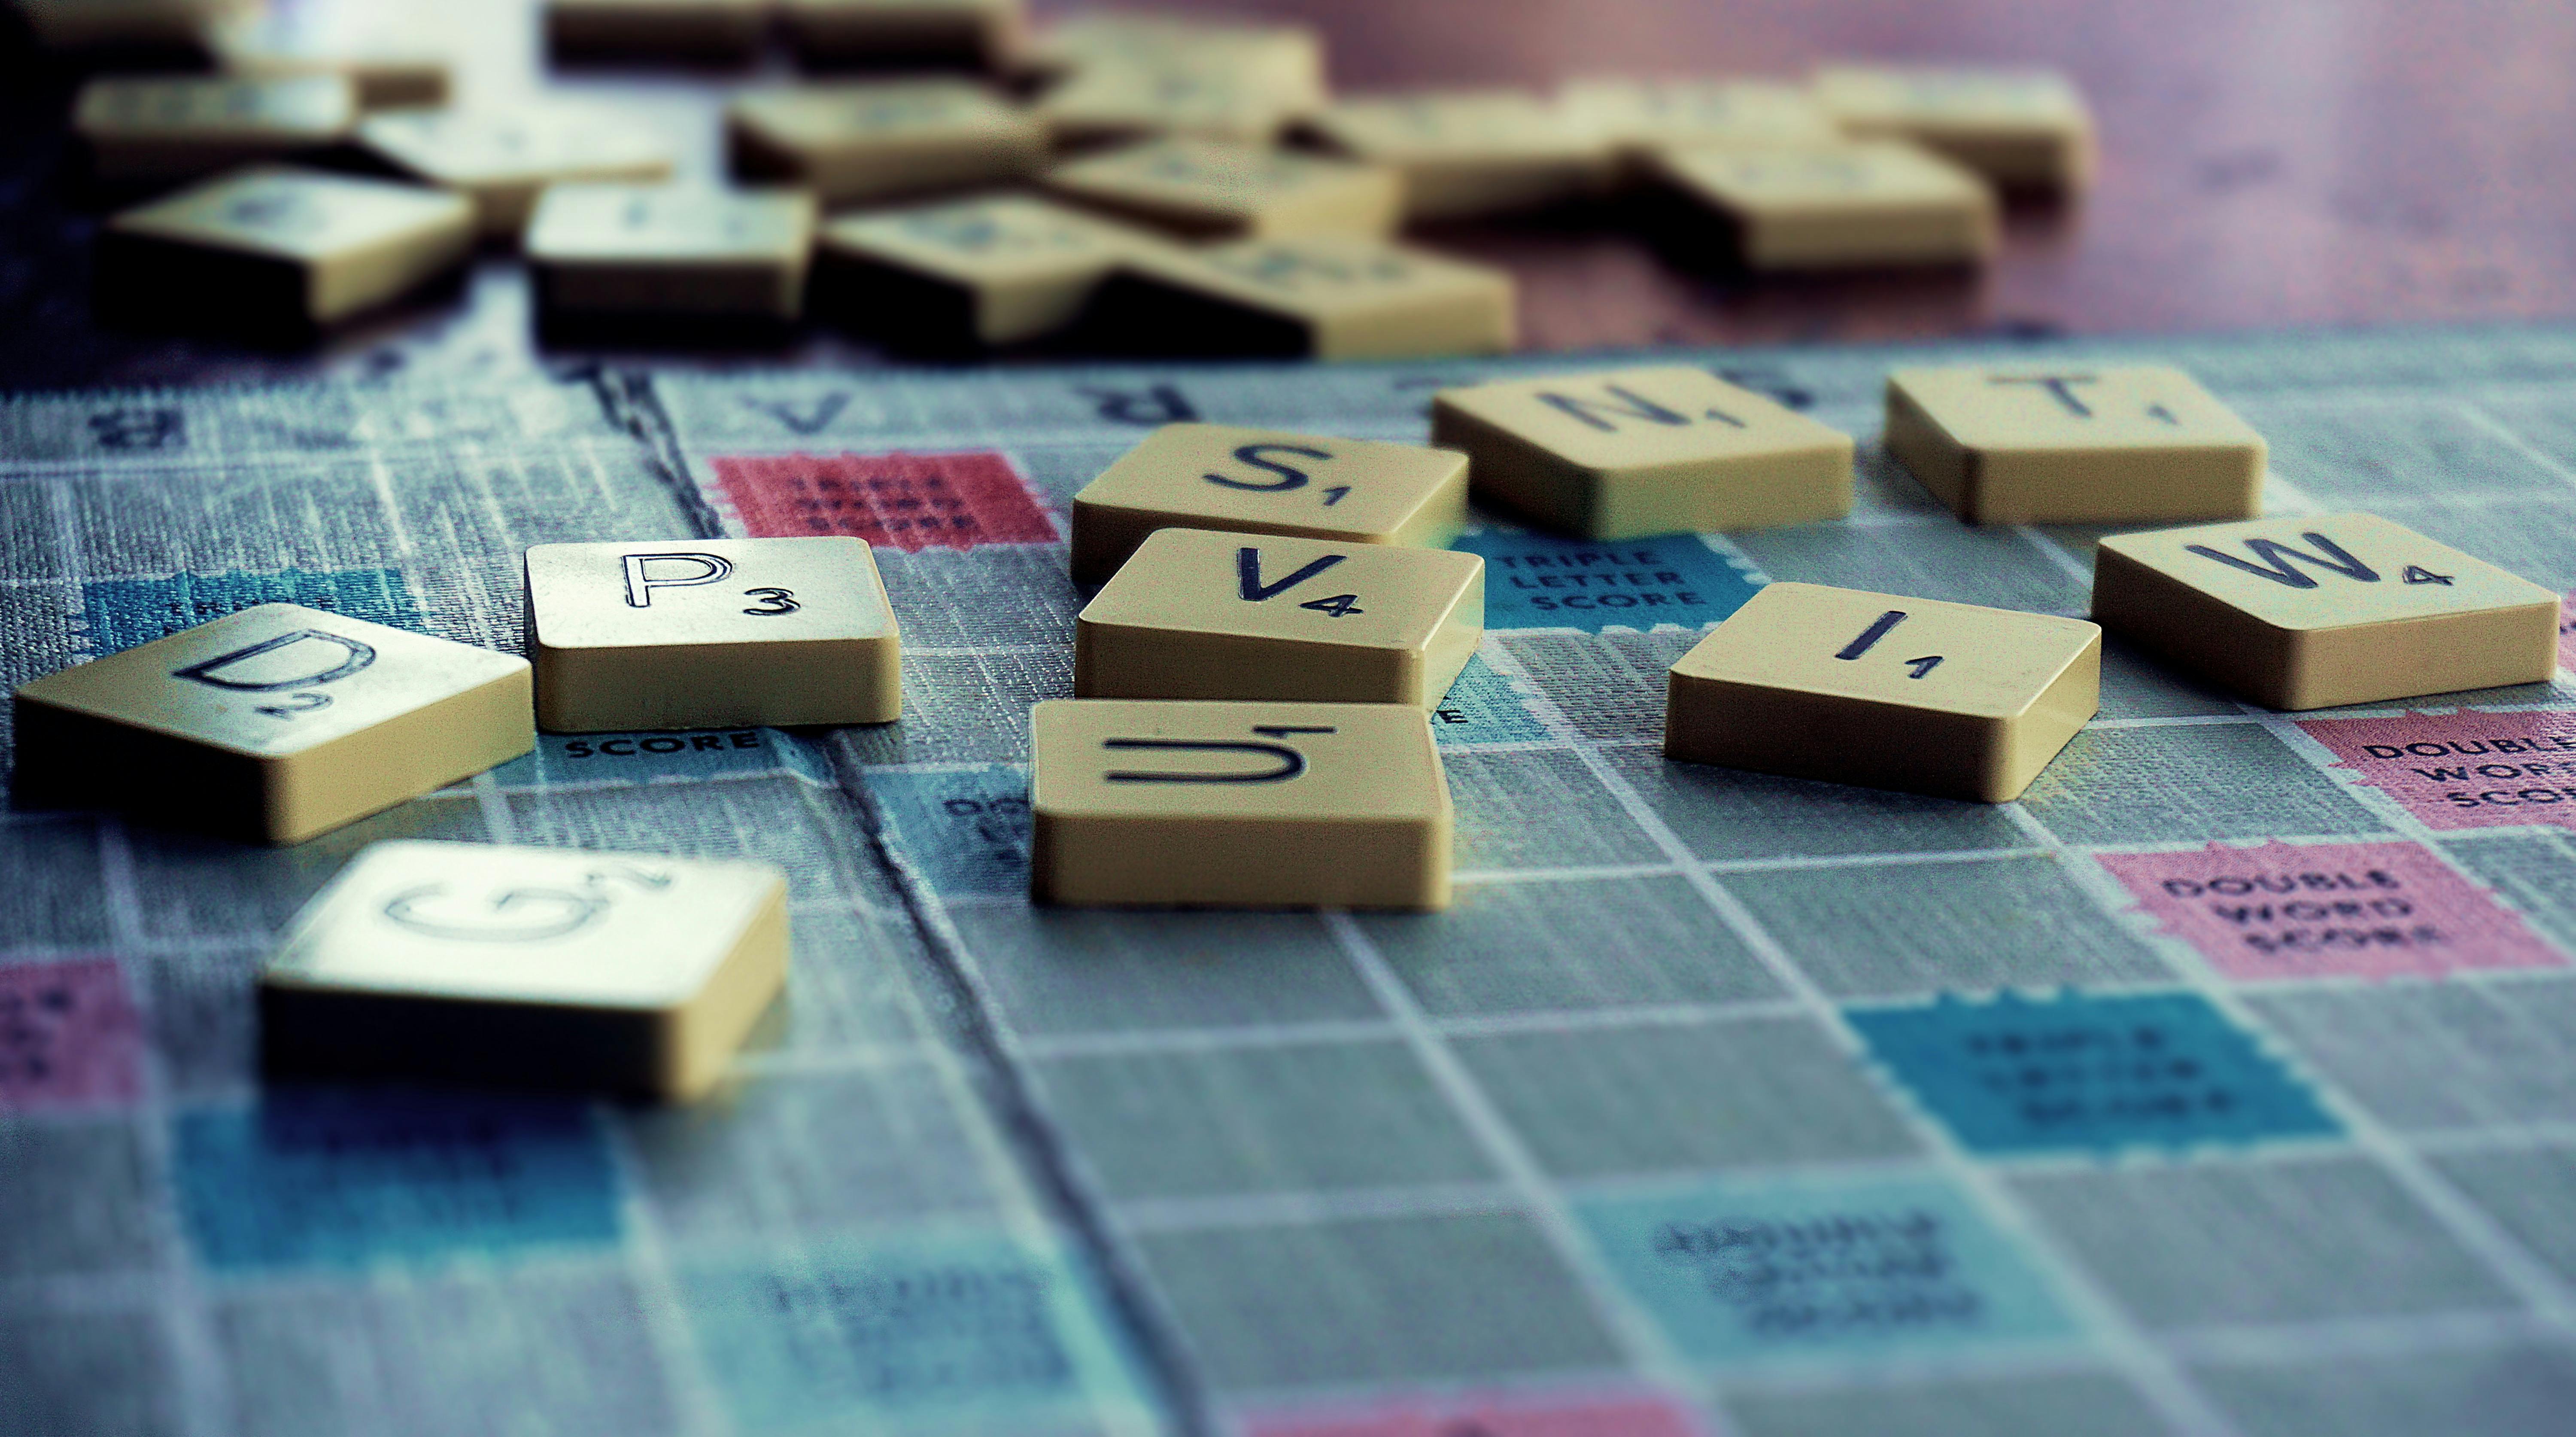 scrabble game will not load on facebook